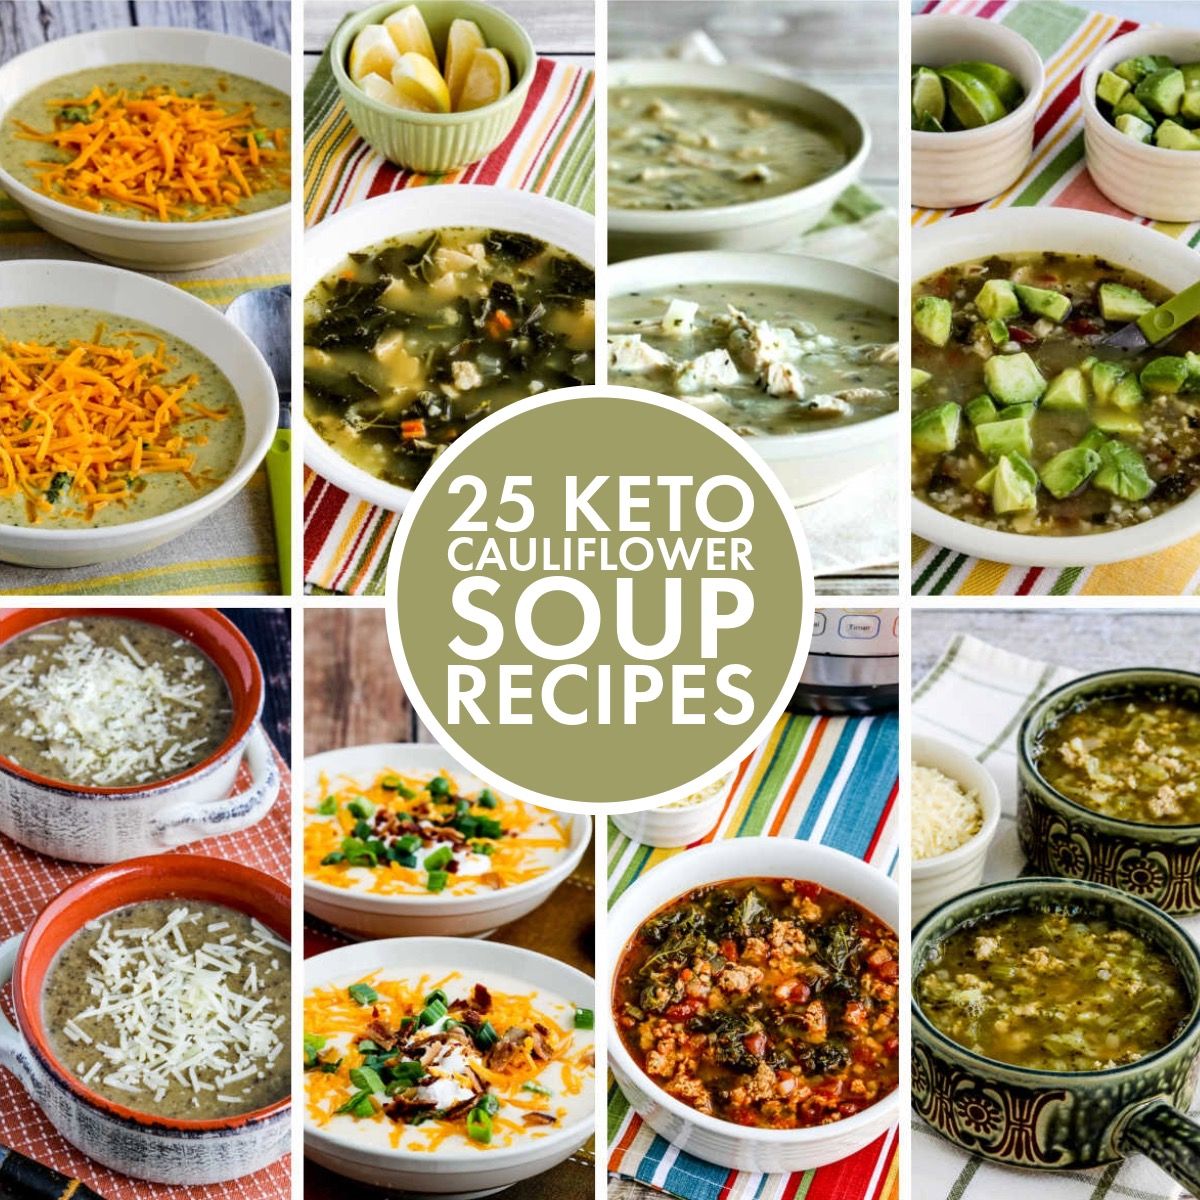 Collage image for 25 Keto Cauliflower Soup Recipes showing featured recipes.